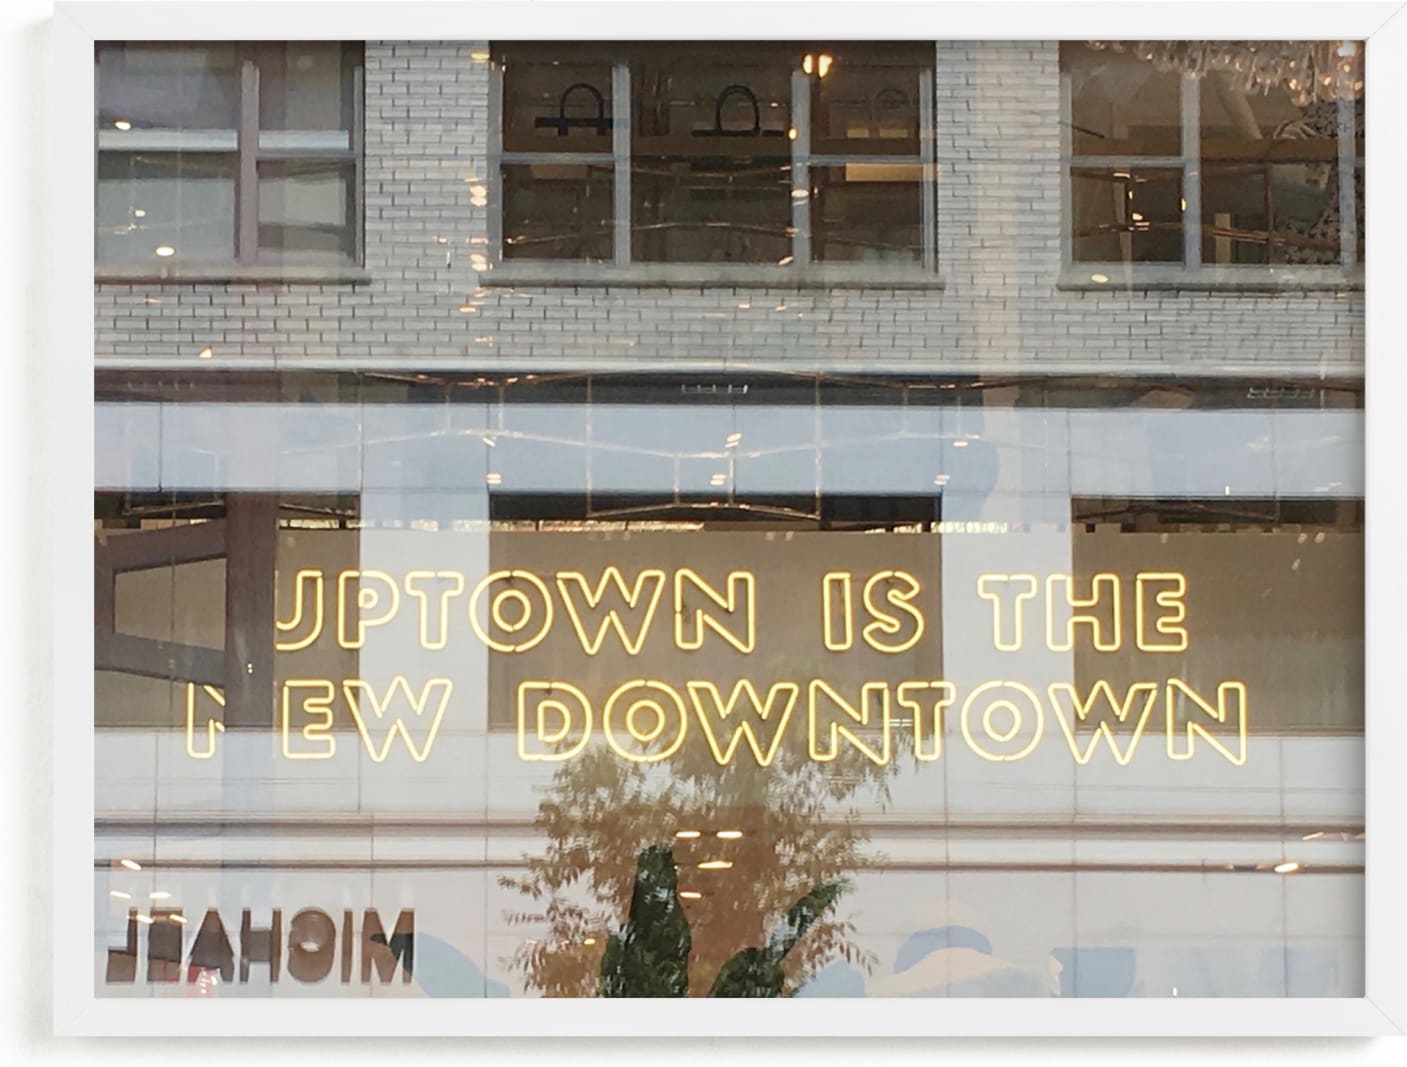 This is a brown art by Jan Kessel called Uptown.